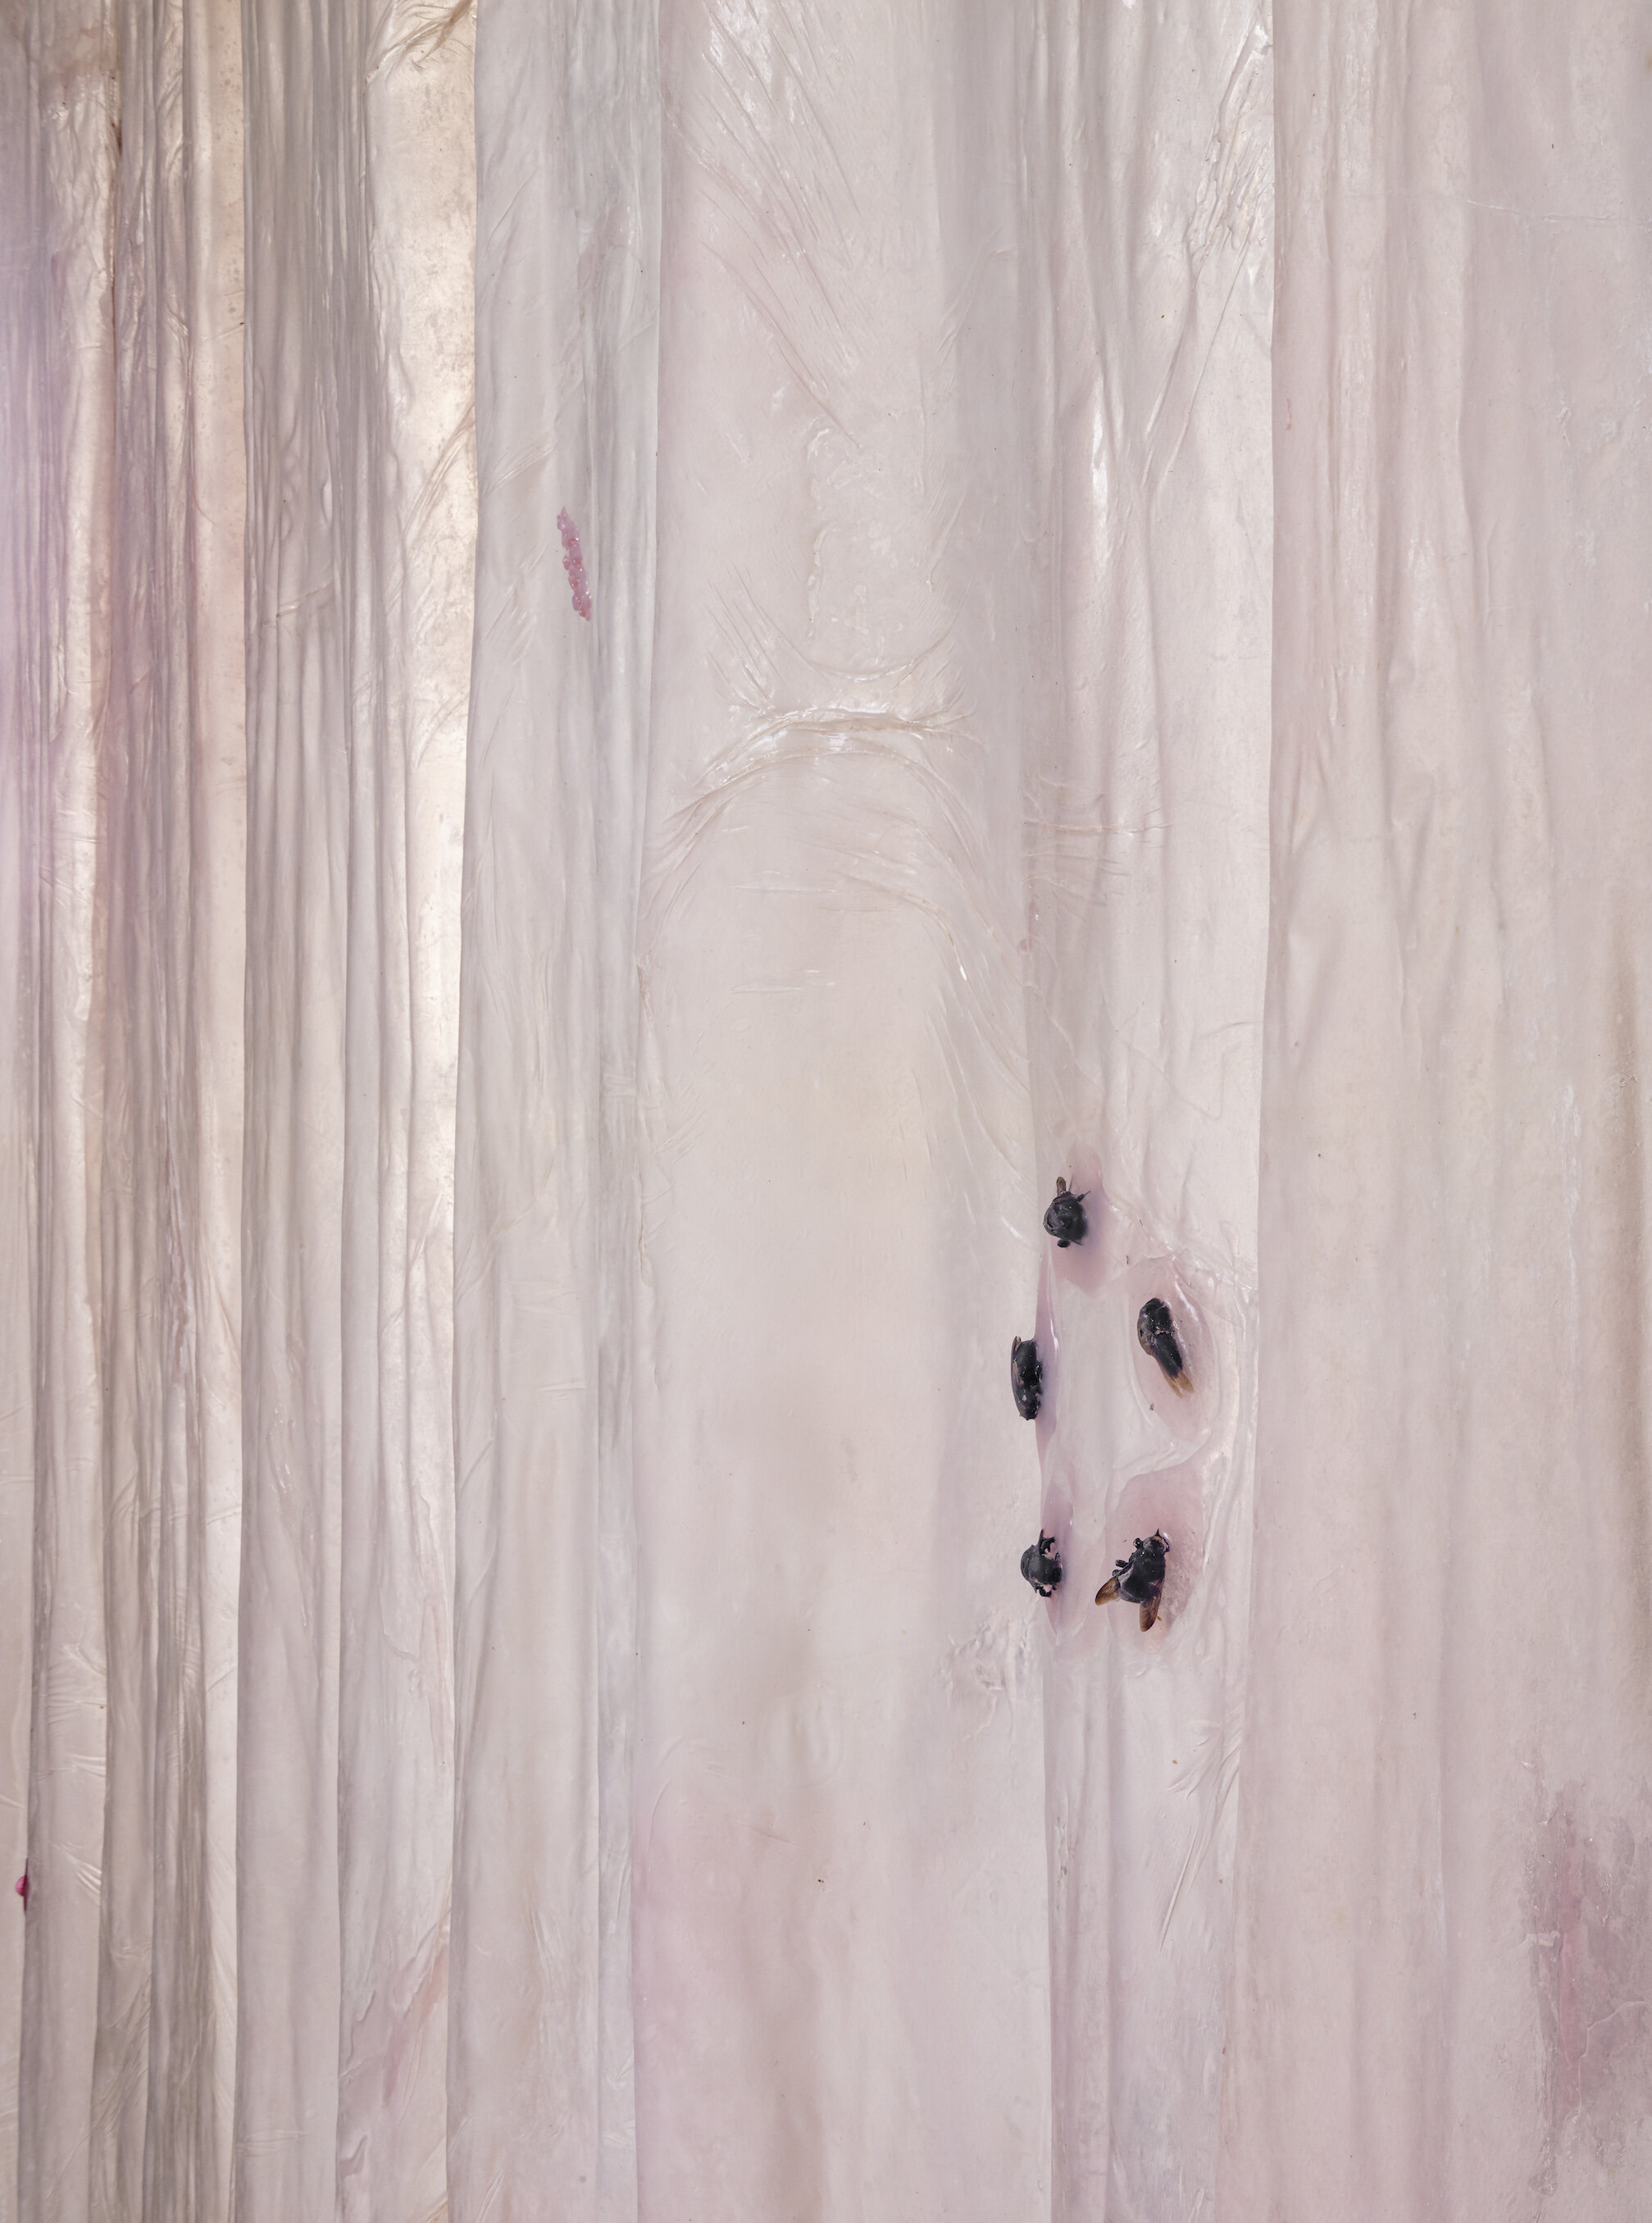  Karinne Smith  Pinky II , 2021 (detail) collagen film, flesh clamps, found bees, falsies, silicone, hair ties, baby powder, glass beads, found photograph, tulle dimensions variable to installation 